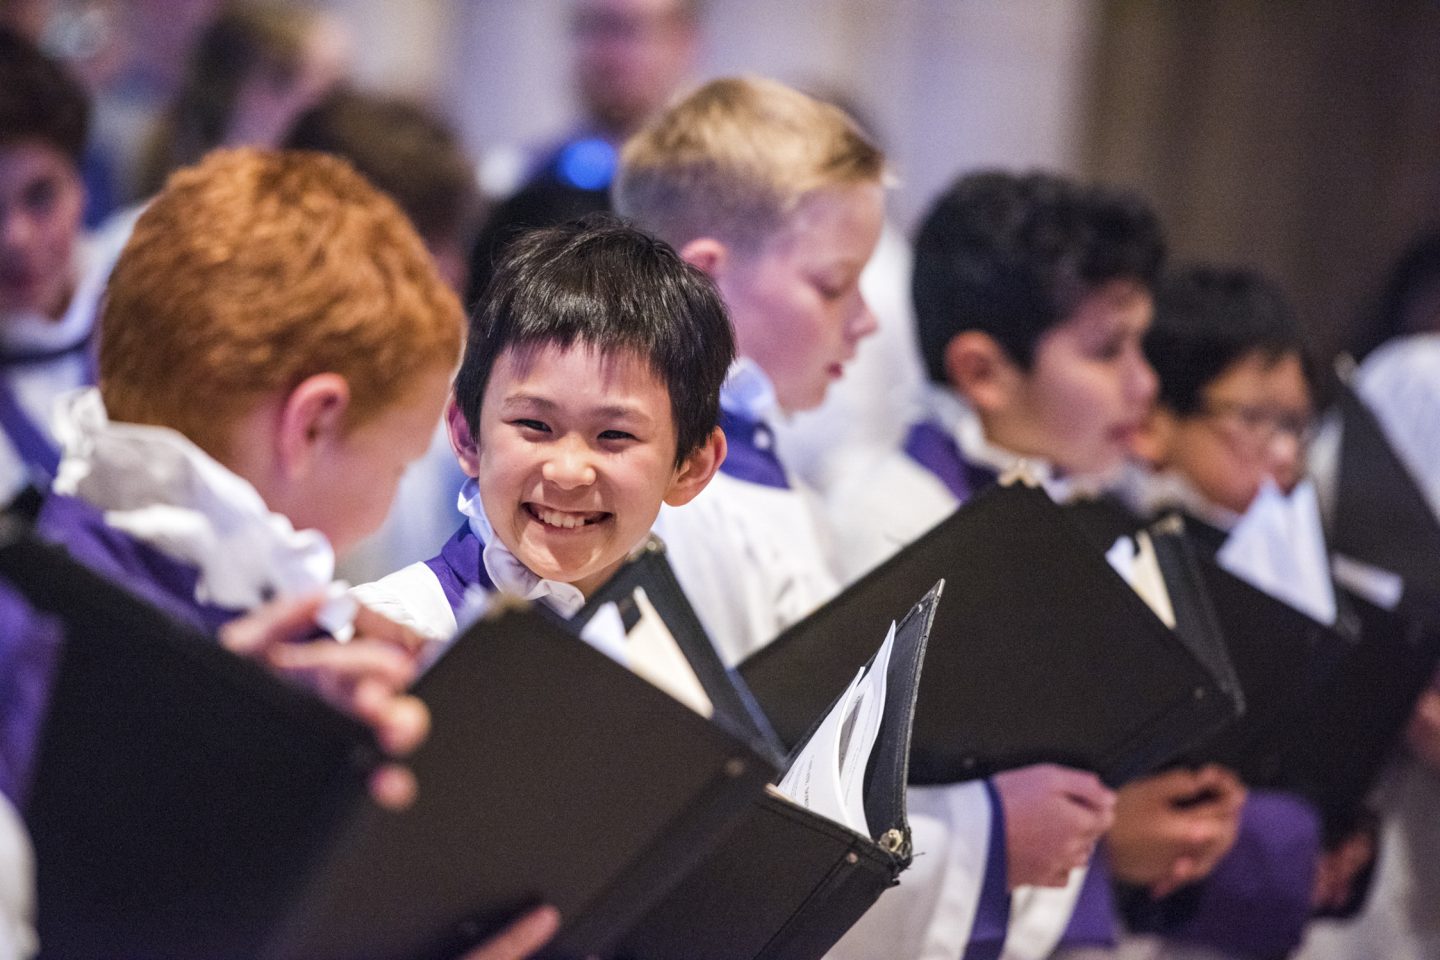 Smiling choristers in the Cathedral